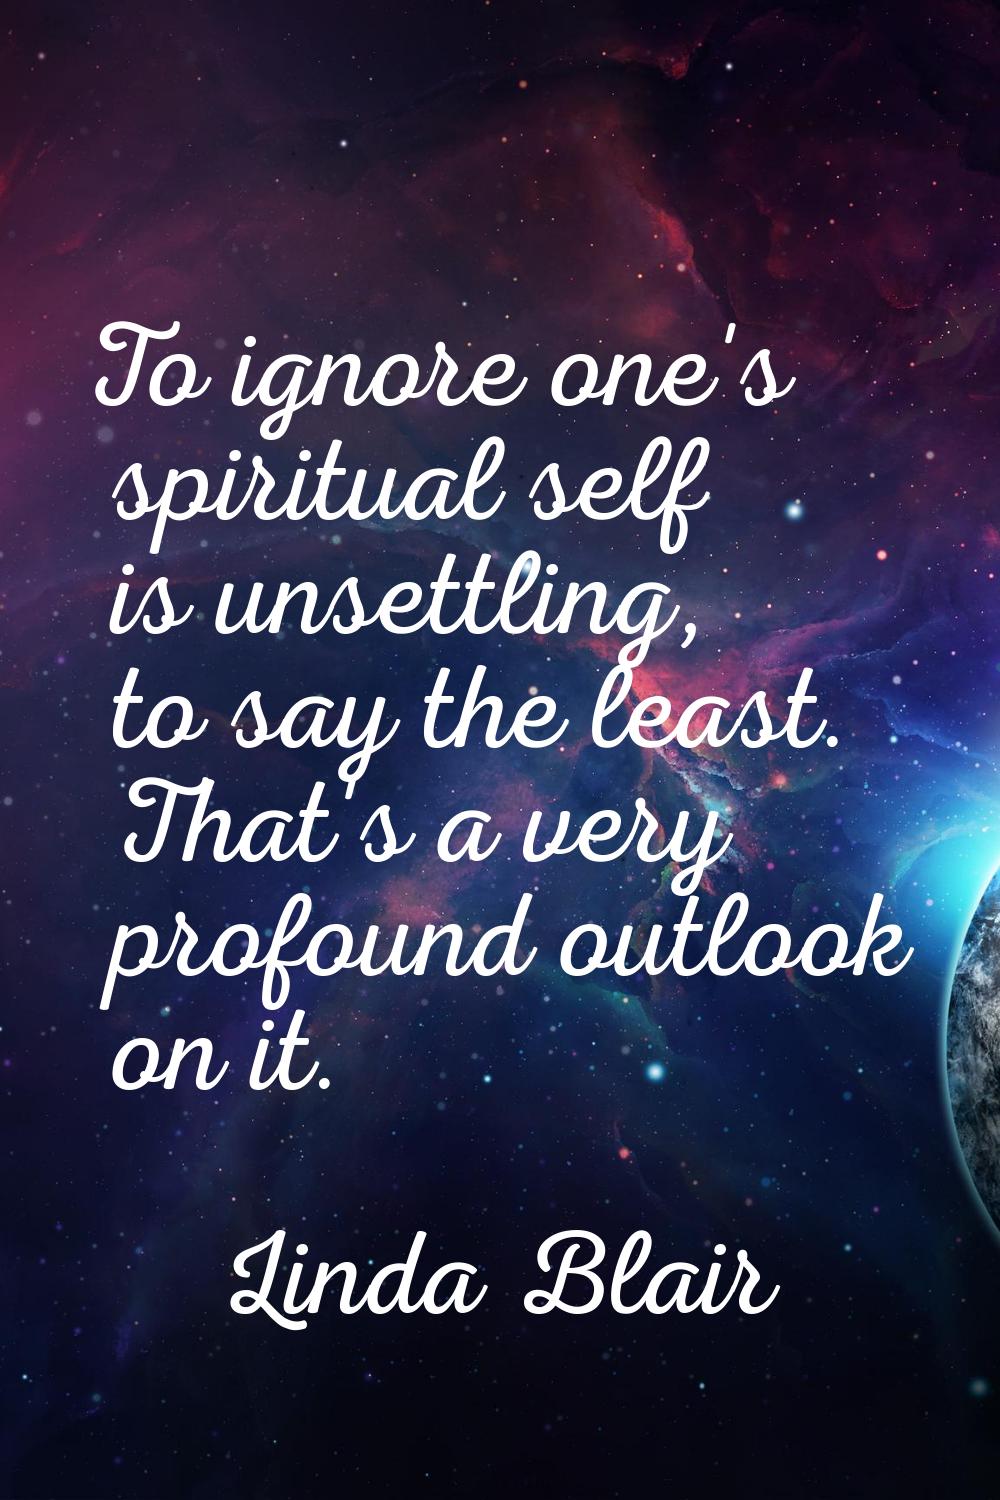 To ignore one's spiritual self is unsettling, to say the least. That's a very profound outlook on i